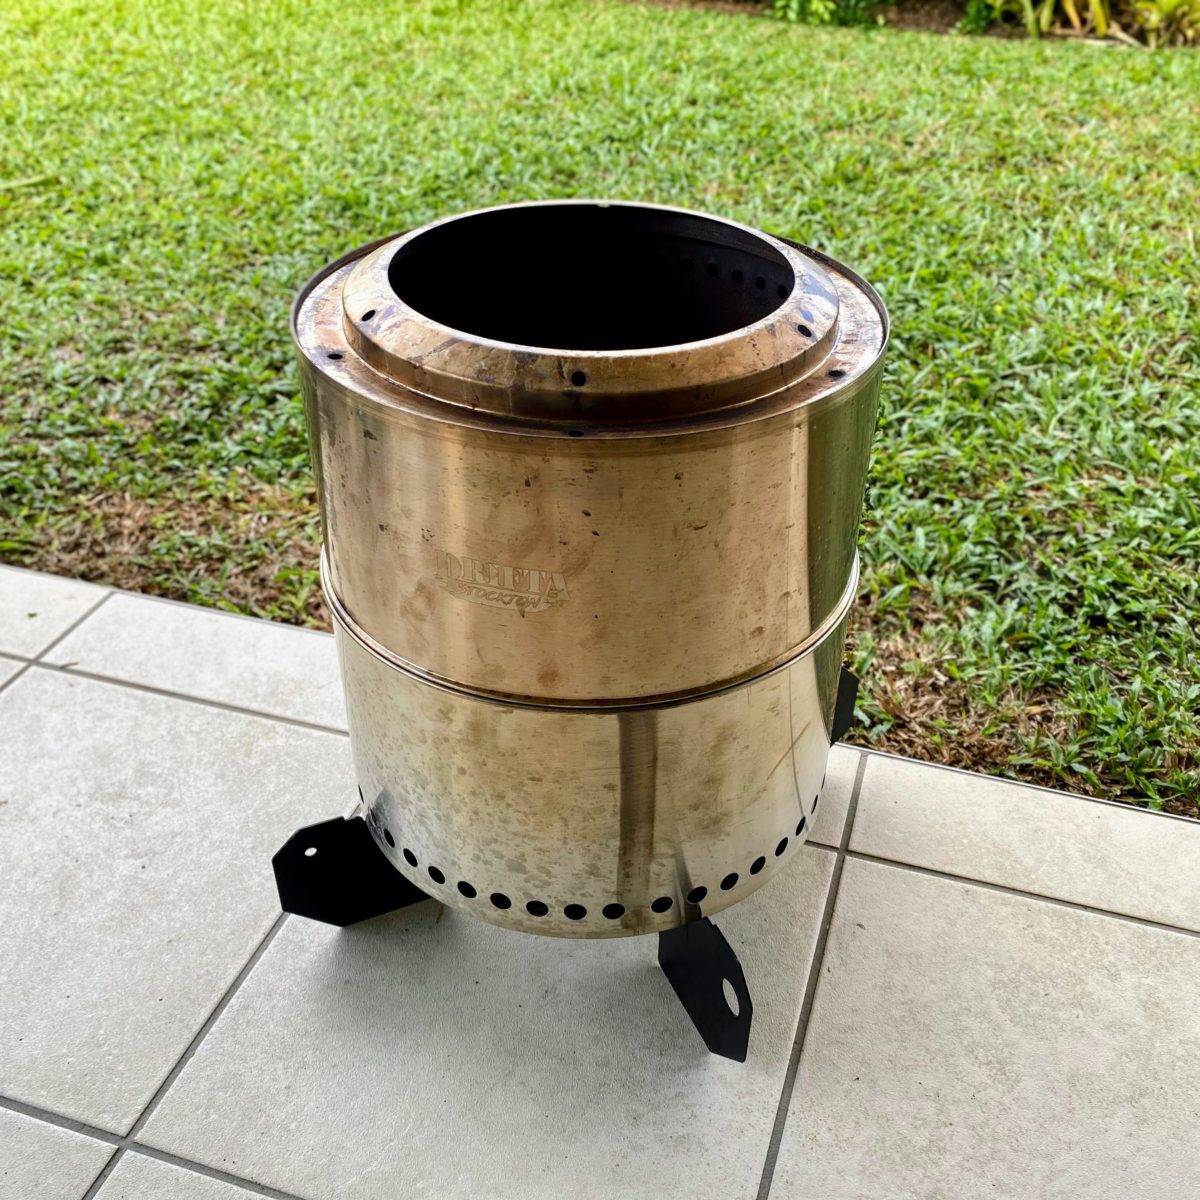 Outdoorstove17